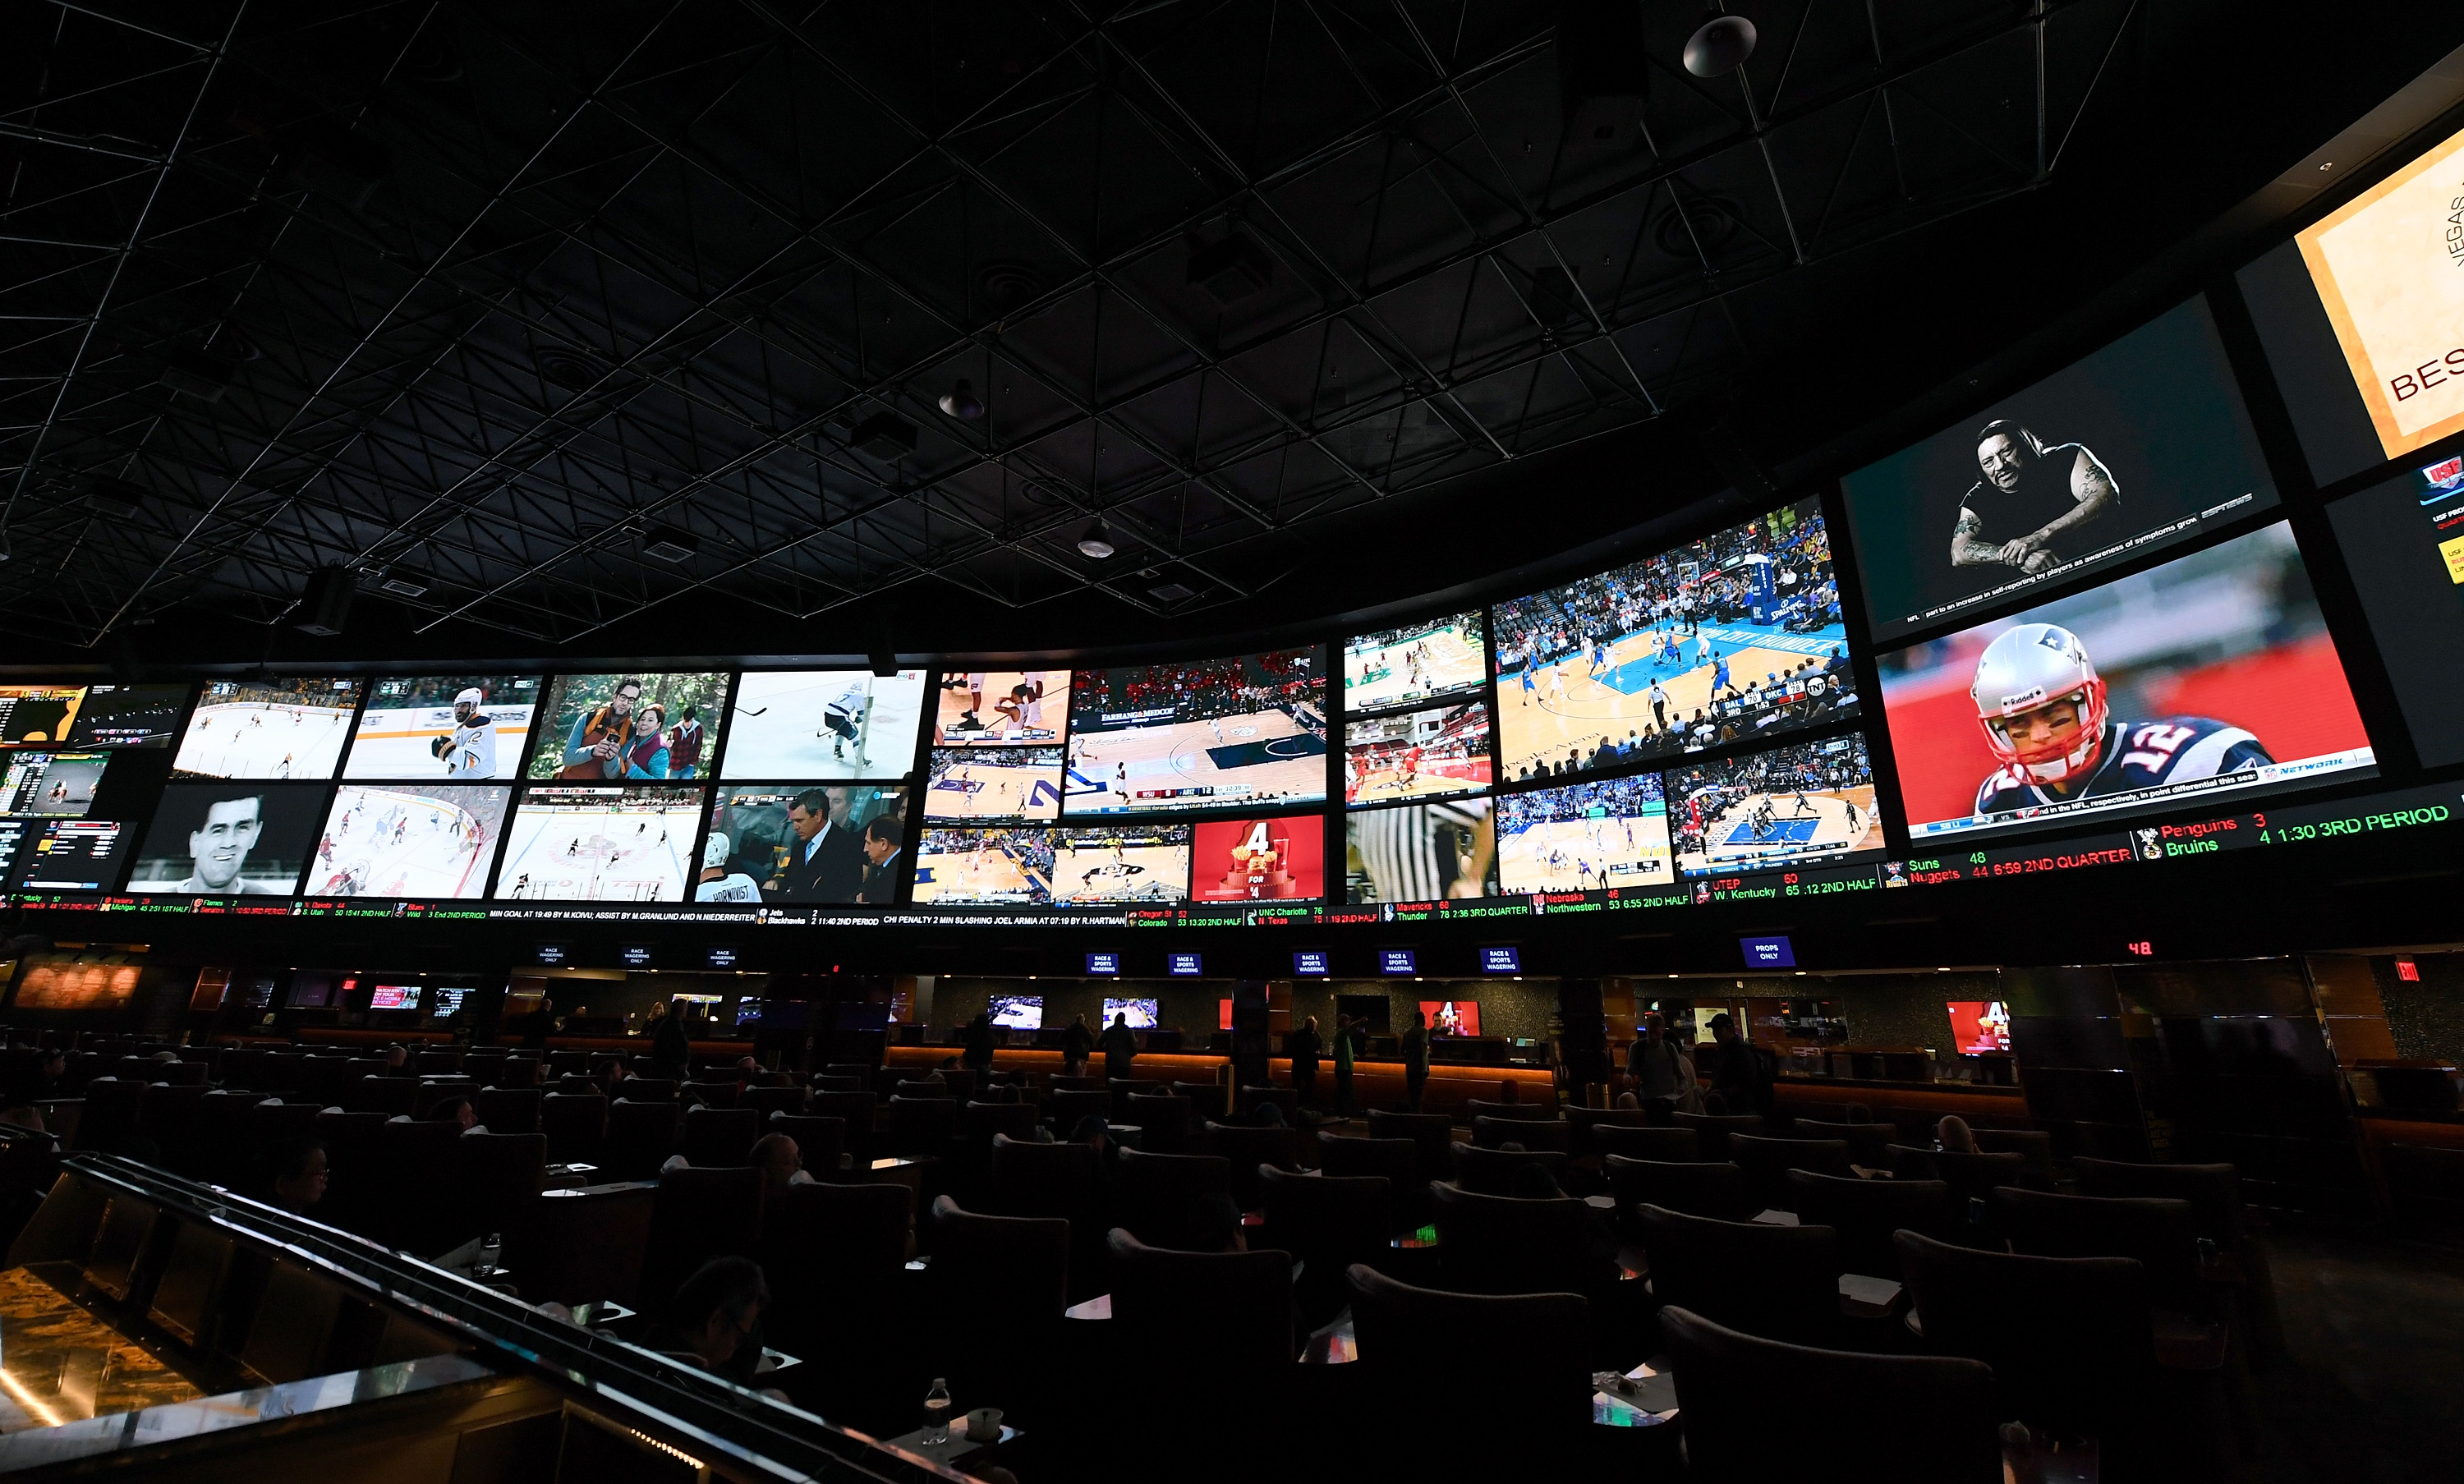 The general public might not be as excited for the 2020 NFL season as in years past, but bettors are more enthused about the NFL than ever.